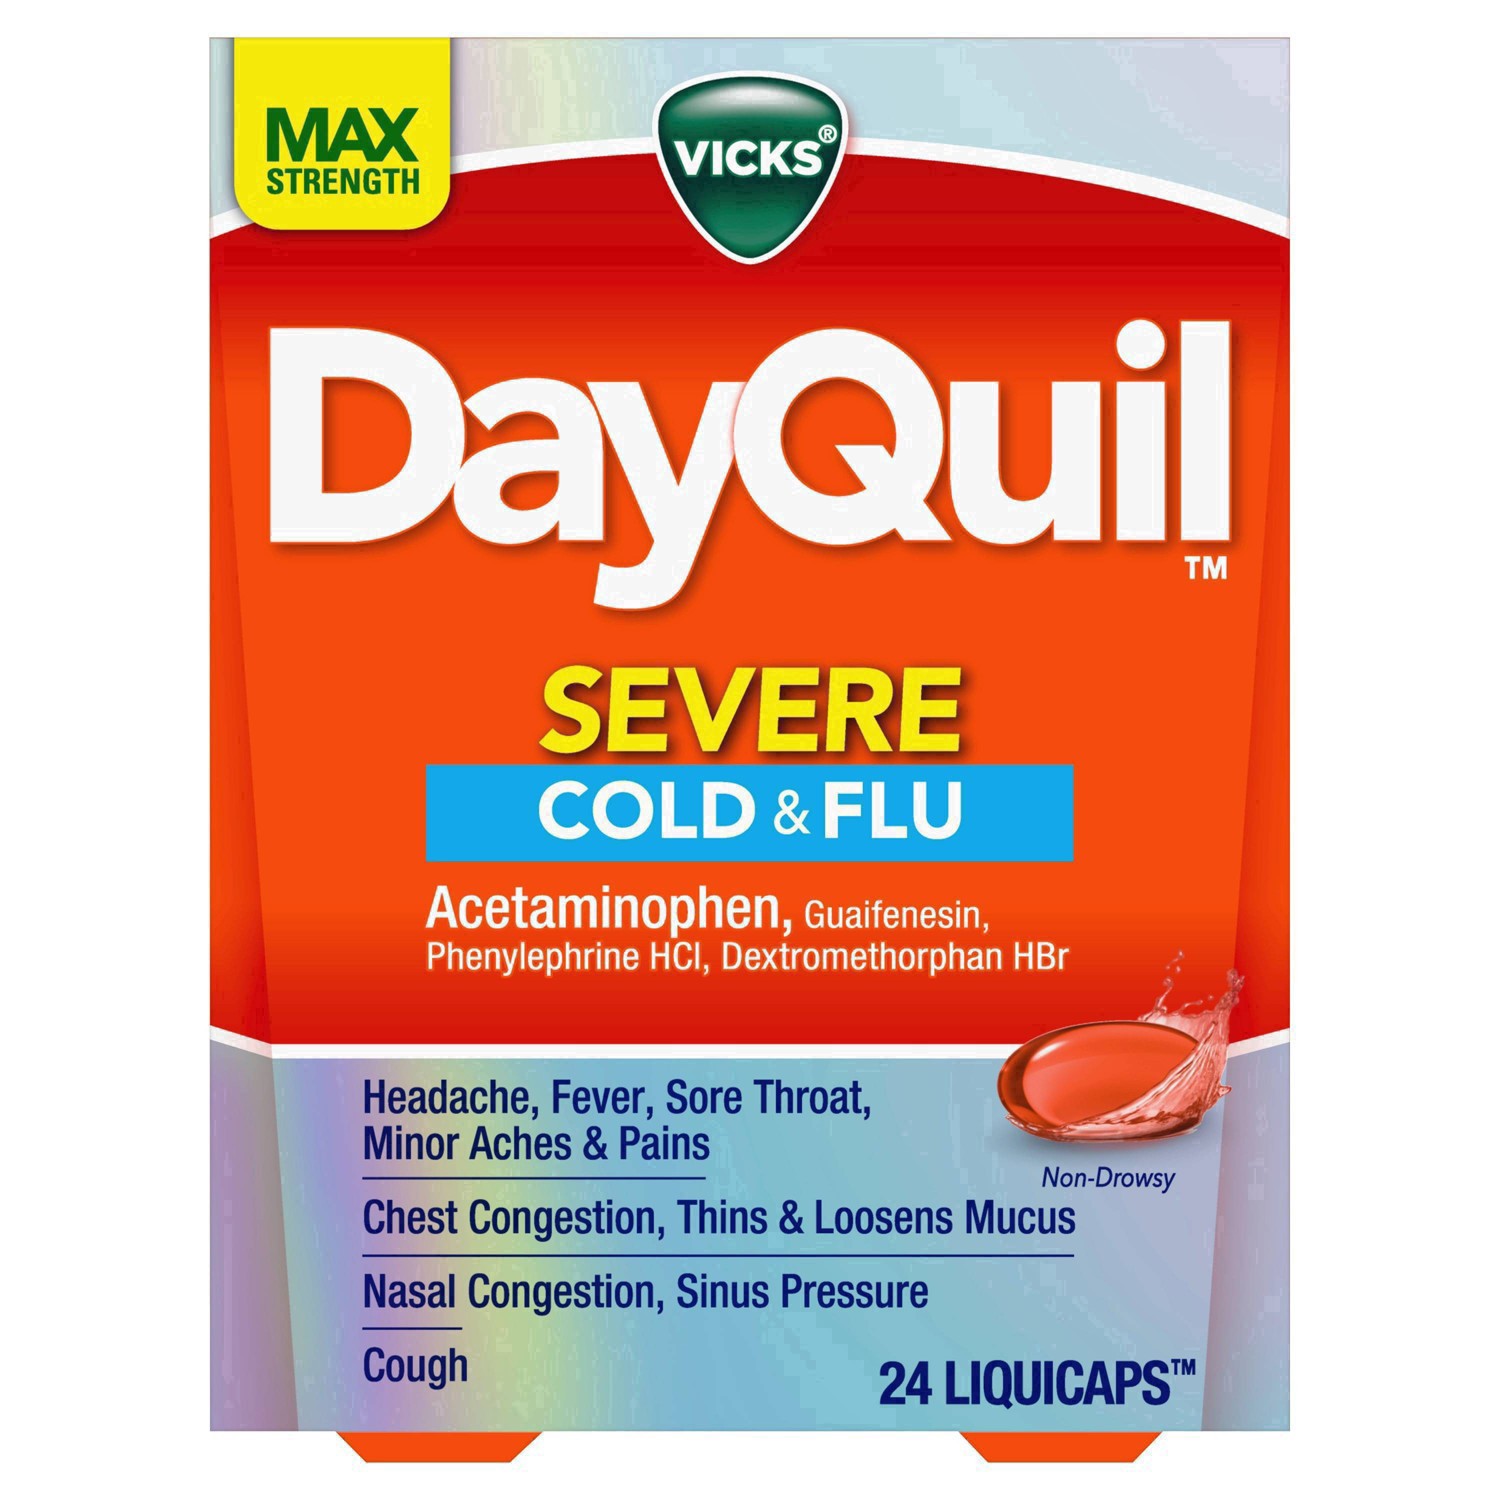 slide 34 of 46, Vicks DayQuil SEVERE Cold & Flu Medicine, Maximum Strength 9-Symptom Non-Drowsy Daytime Relief for Headache, Fever, Sore Throat, Minor Aches and Pains, Chest Congestion, Stuffy Nose, Nasal Congestion, Sinus Pressure, and Cough, 24 Liquicaps, 24 ct